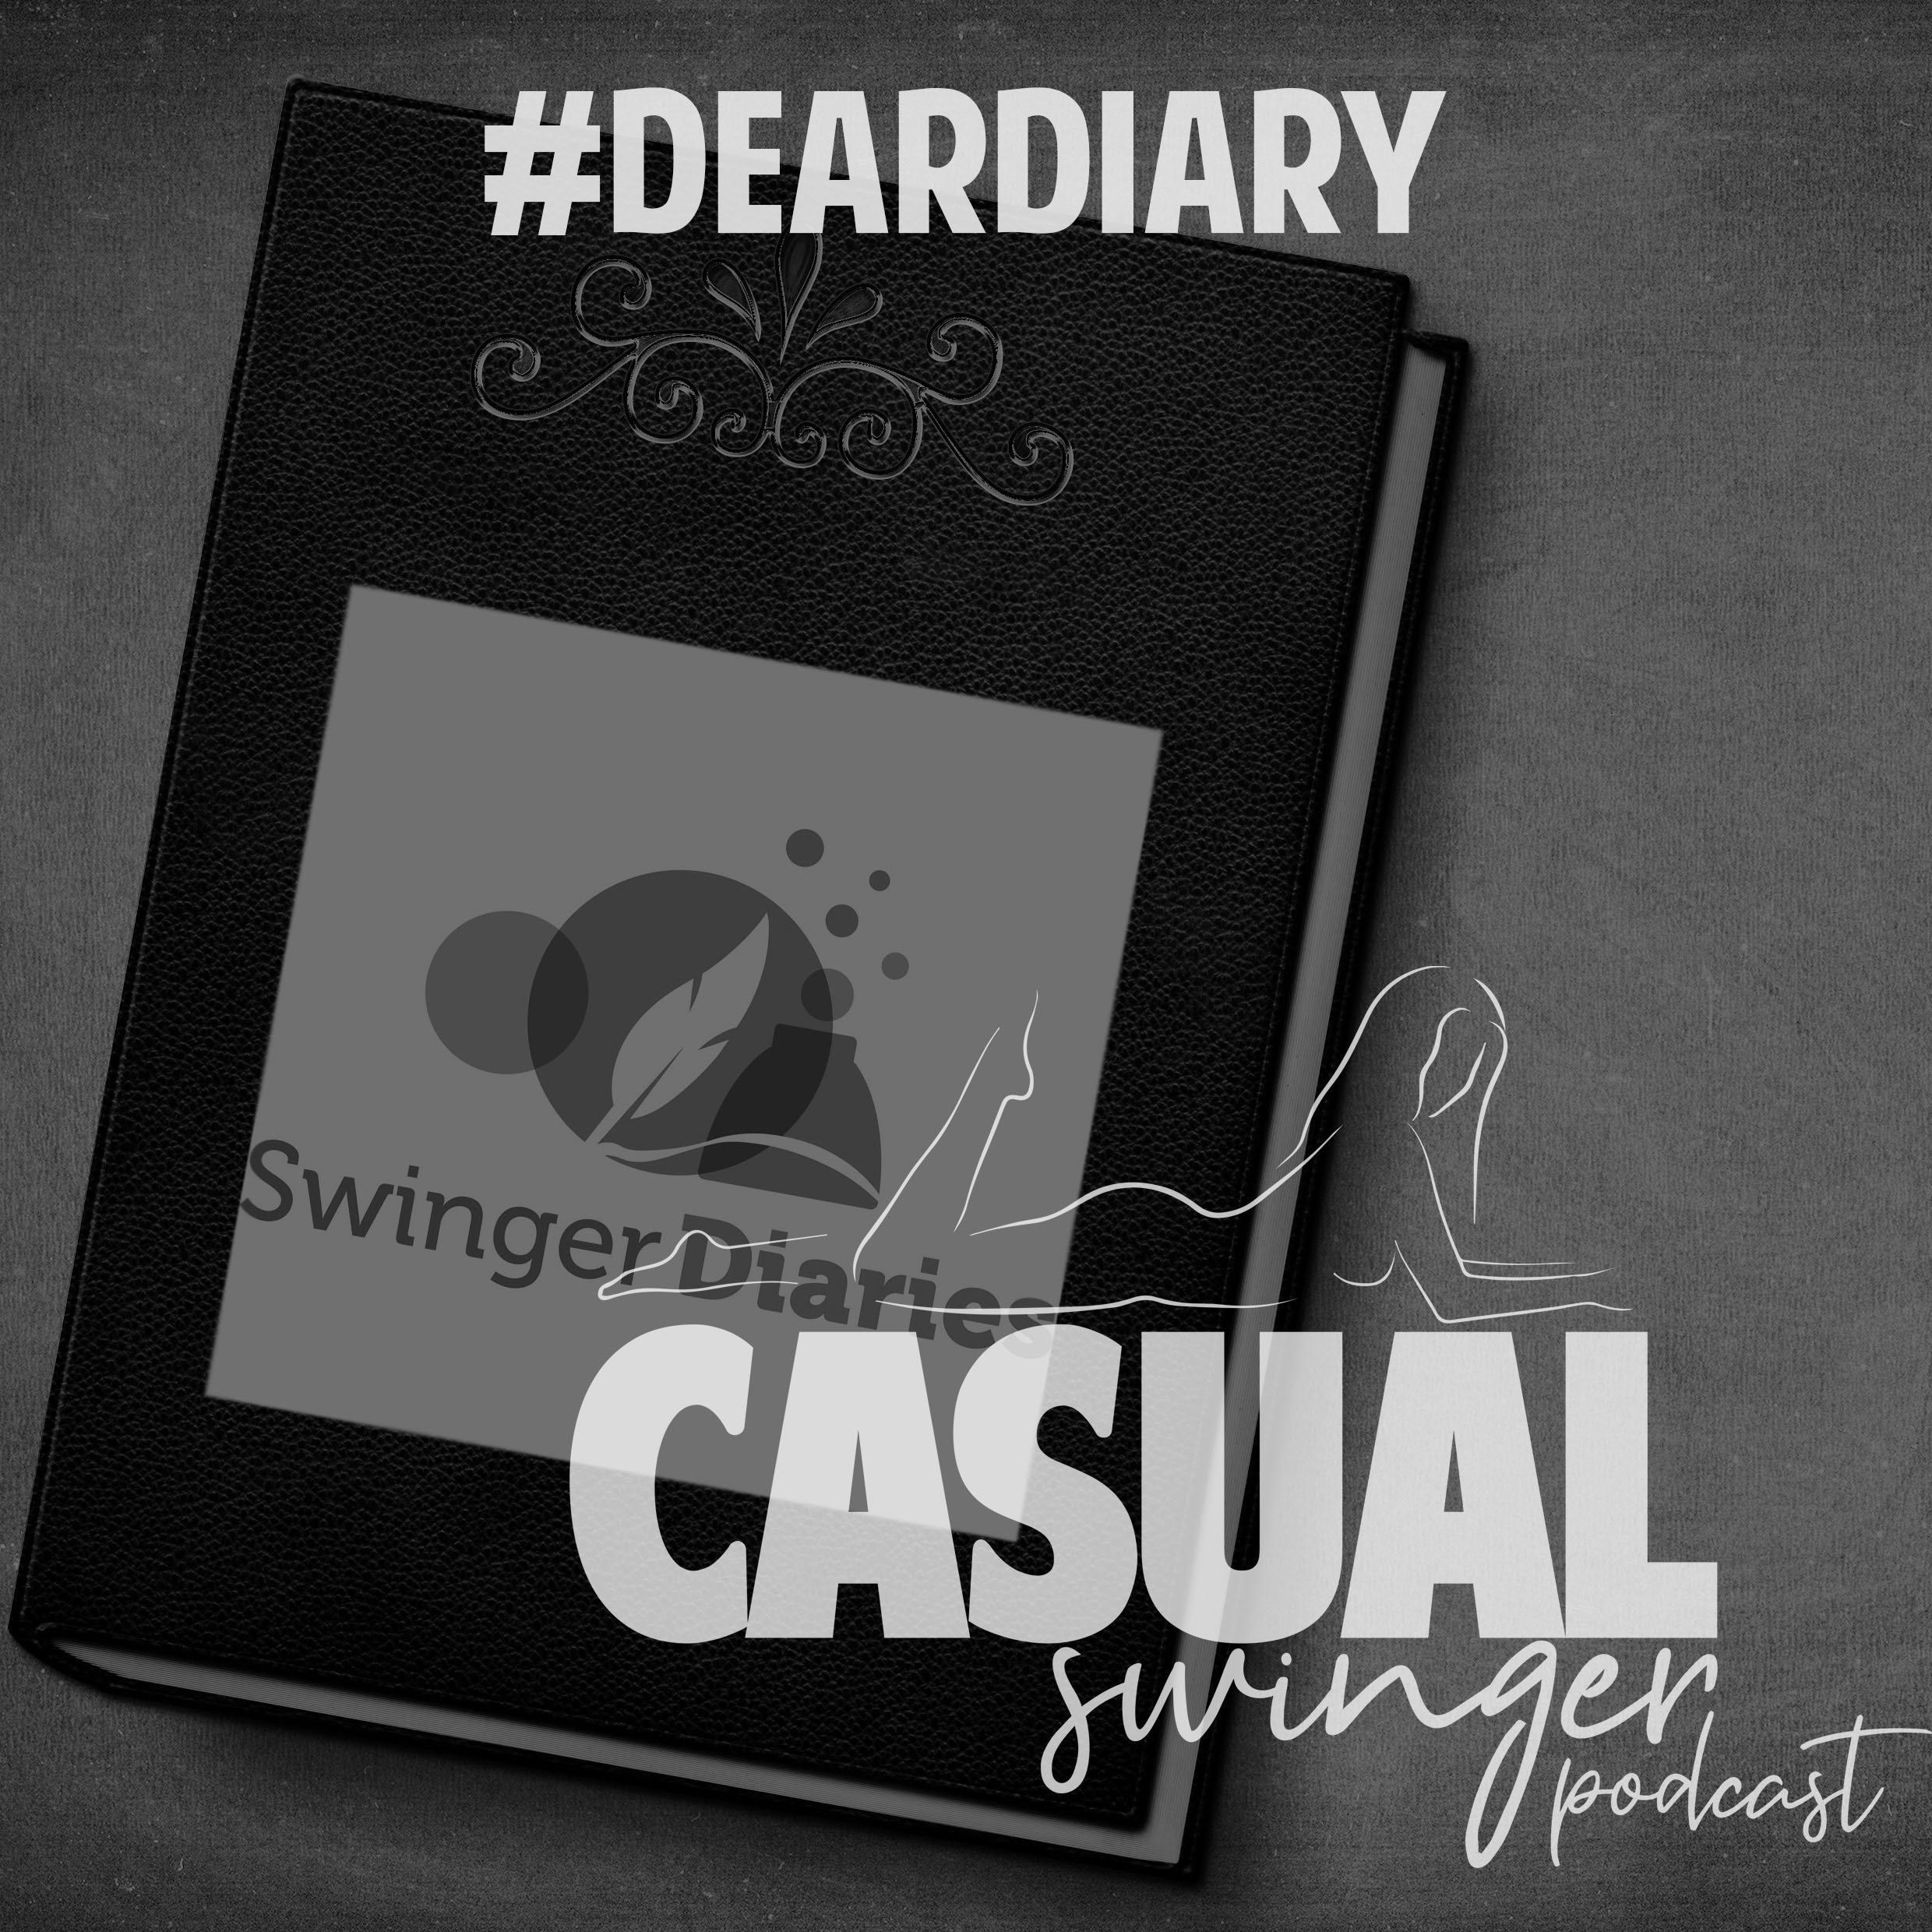 The Casual Swinger...Diaries? - Where are they now w/ Paige and Penn of ”The Swinger Diaries”